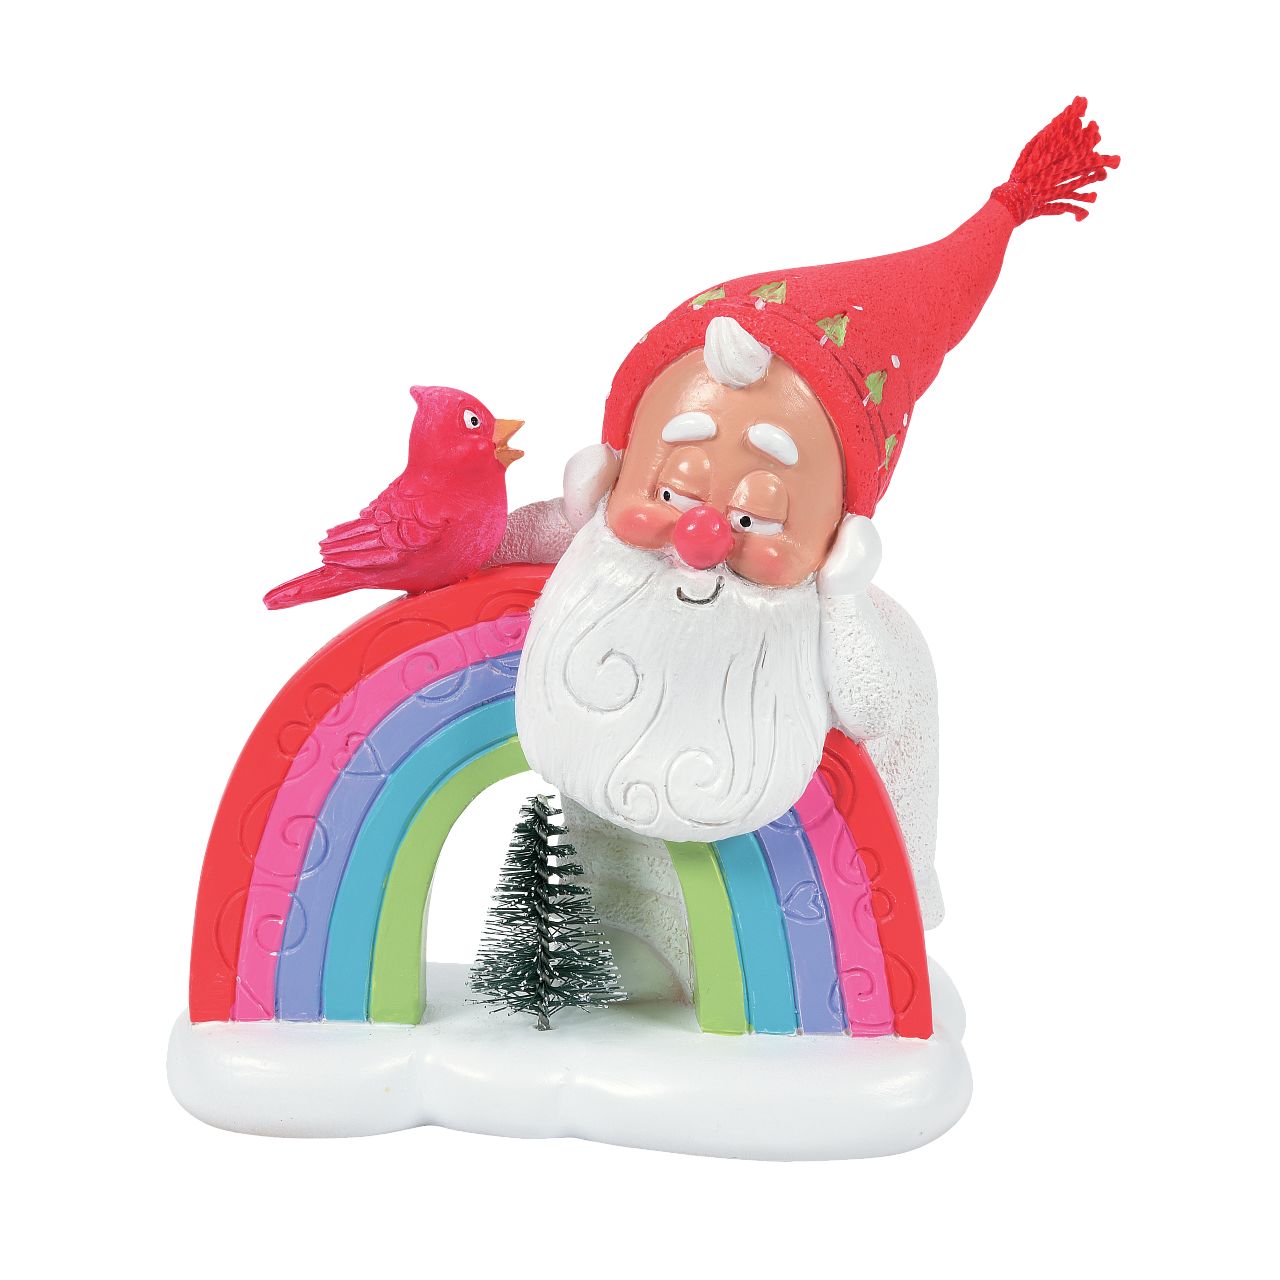 Department 56 Snowpinions Christmas Snow Gnome With Rainbow  This cute Snow Gnome with Rainbow. Hand crafted from high quality cast stone, they have been hand painted by our in-house artists to ensure a high level of detail. This Snow Gnome even has a real tassel atop his pink hat. This is the perfect festive gift or accessory.